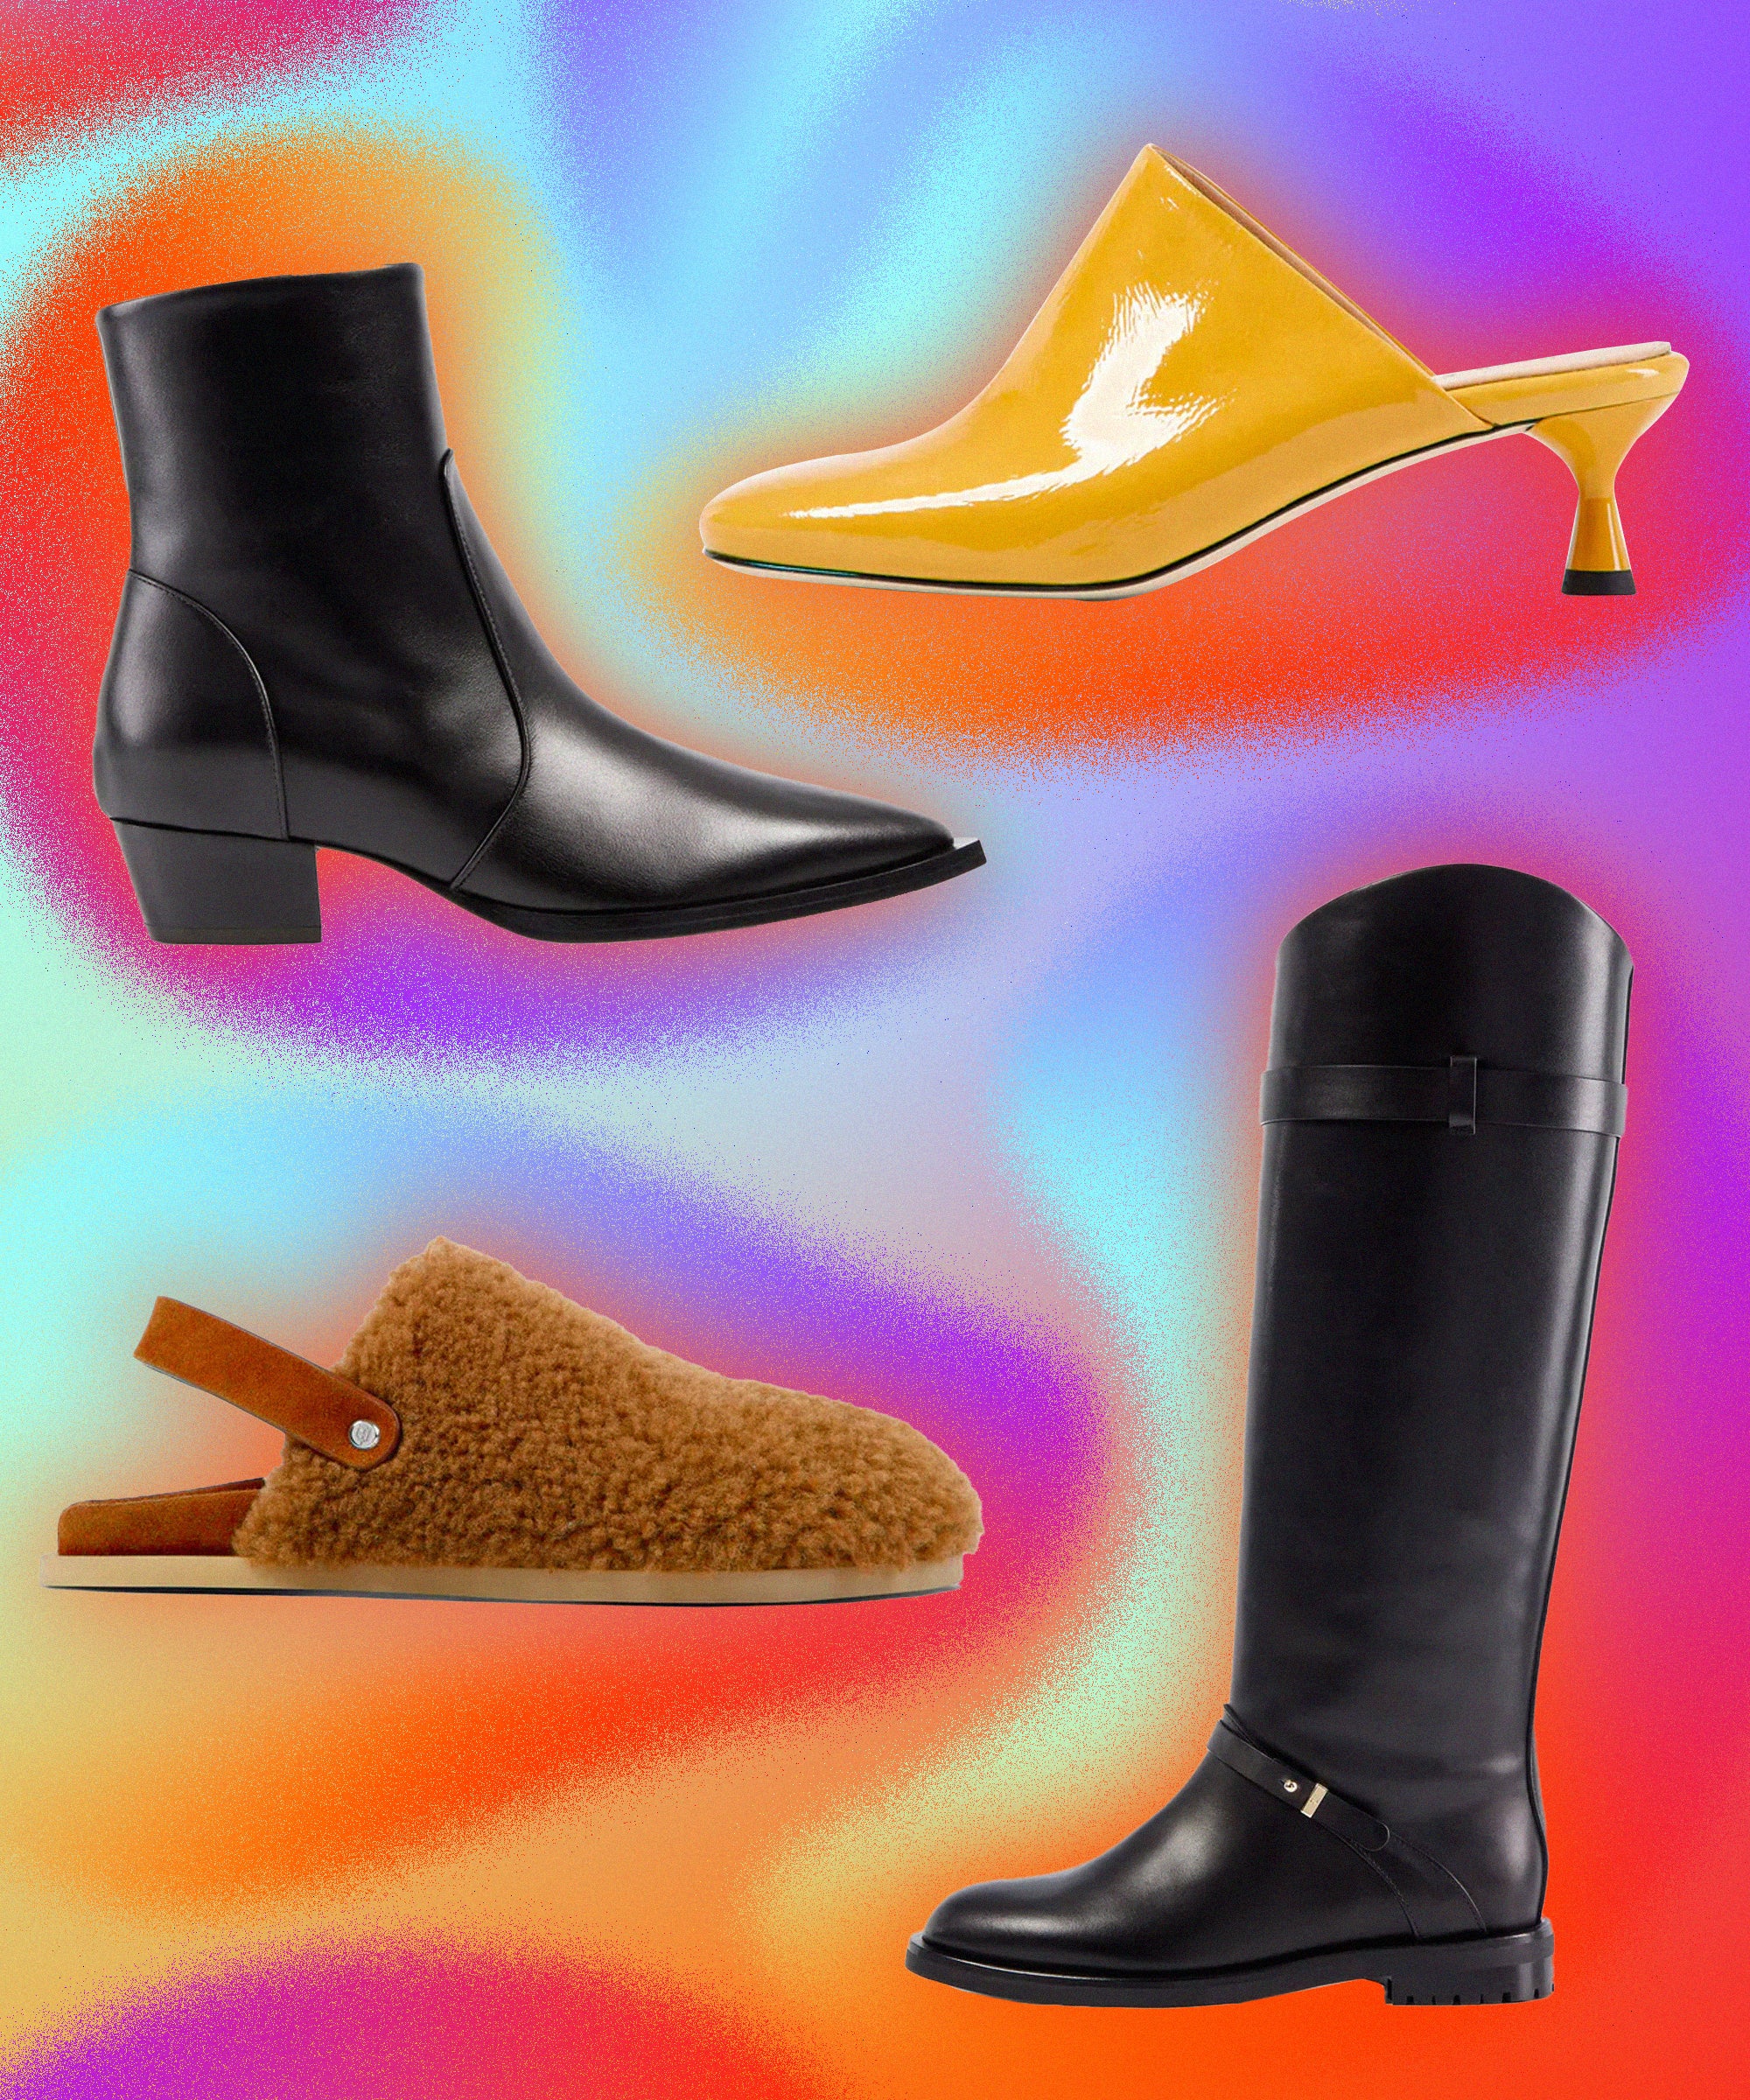 All the fashion girls I know would like a pair of rain boots for Christmas